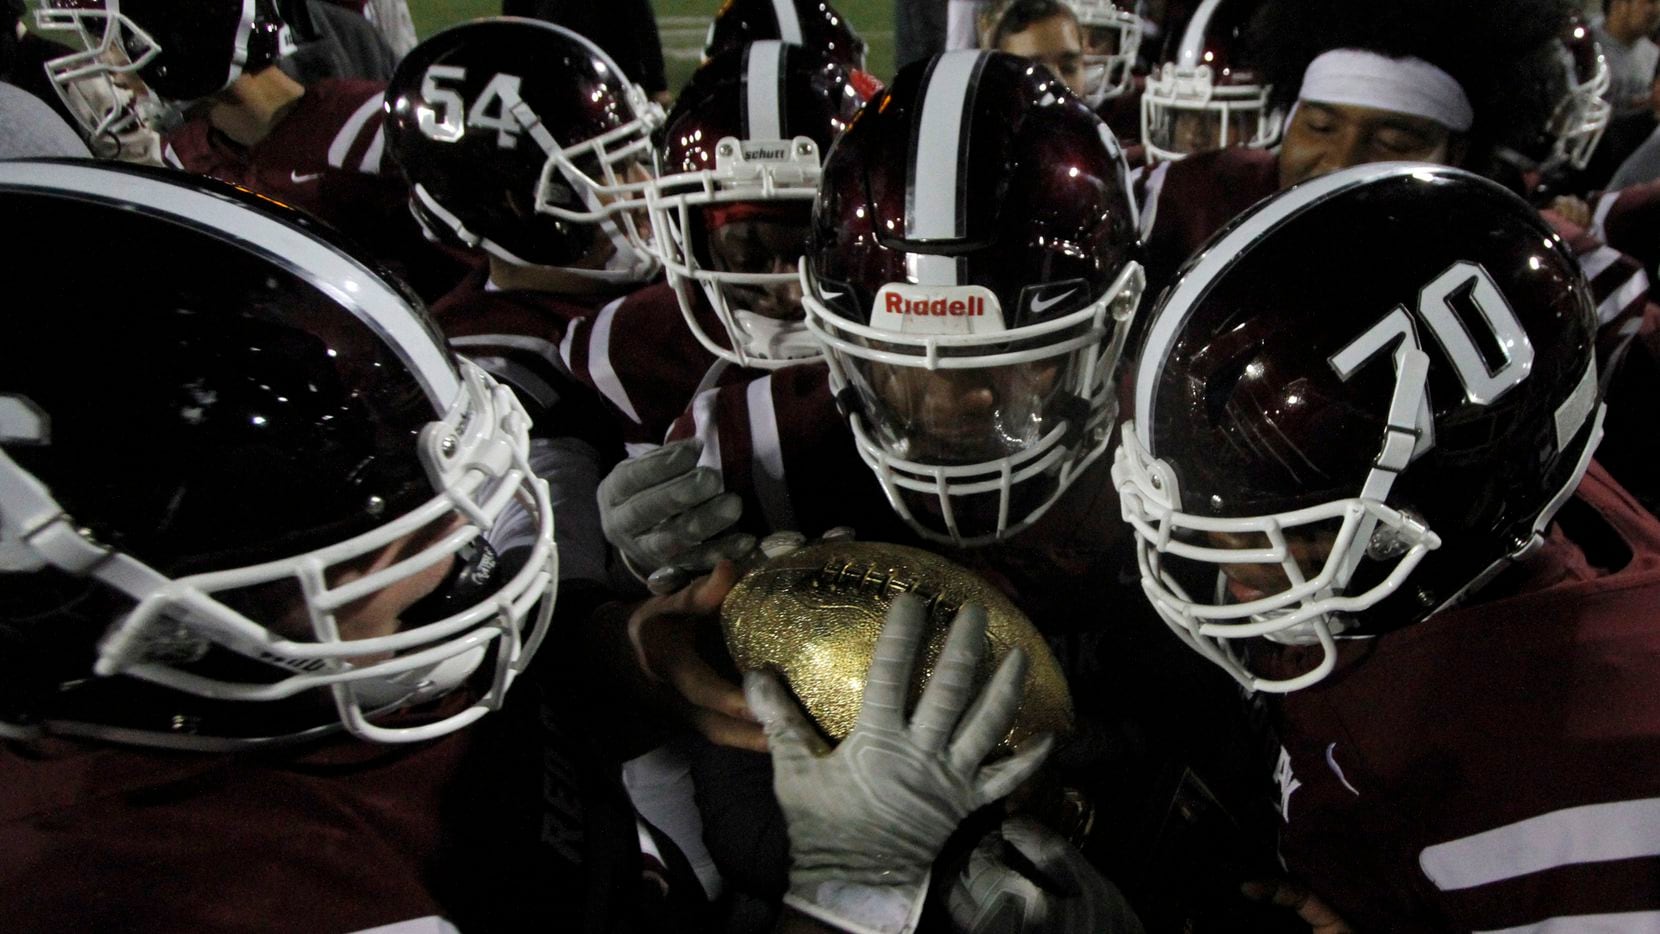 Members of the Red Oak Hawks marvel at the golden football atop a trophy presented after...